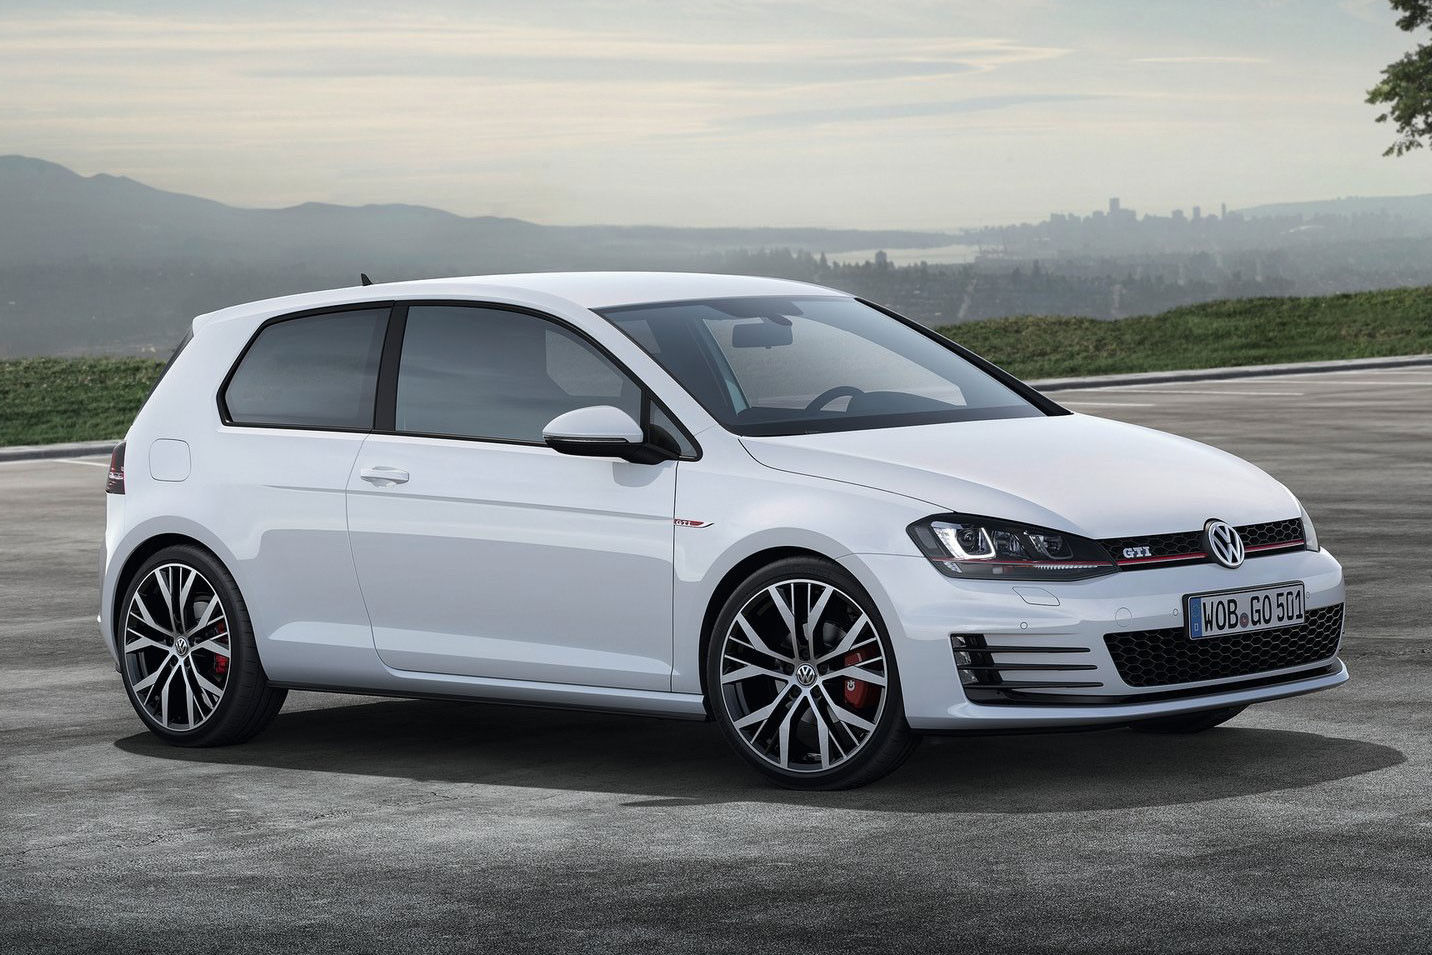 7th Generation Golf is Finally Here!